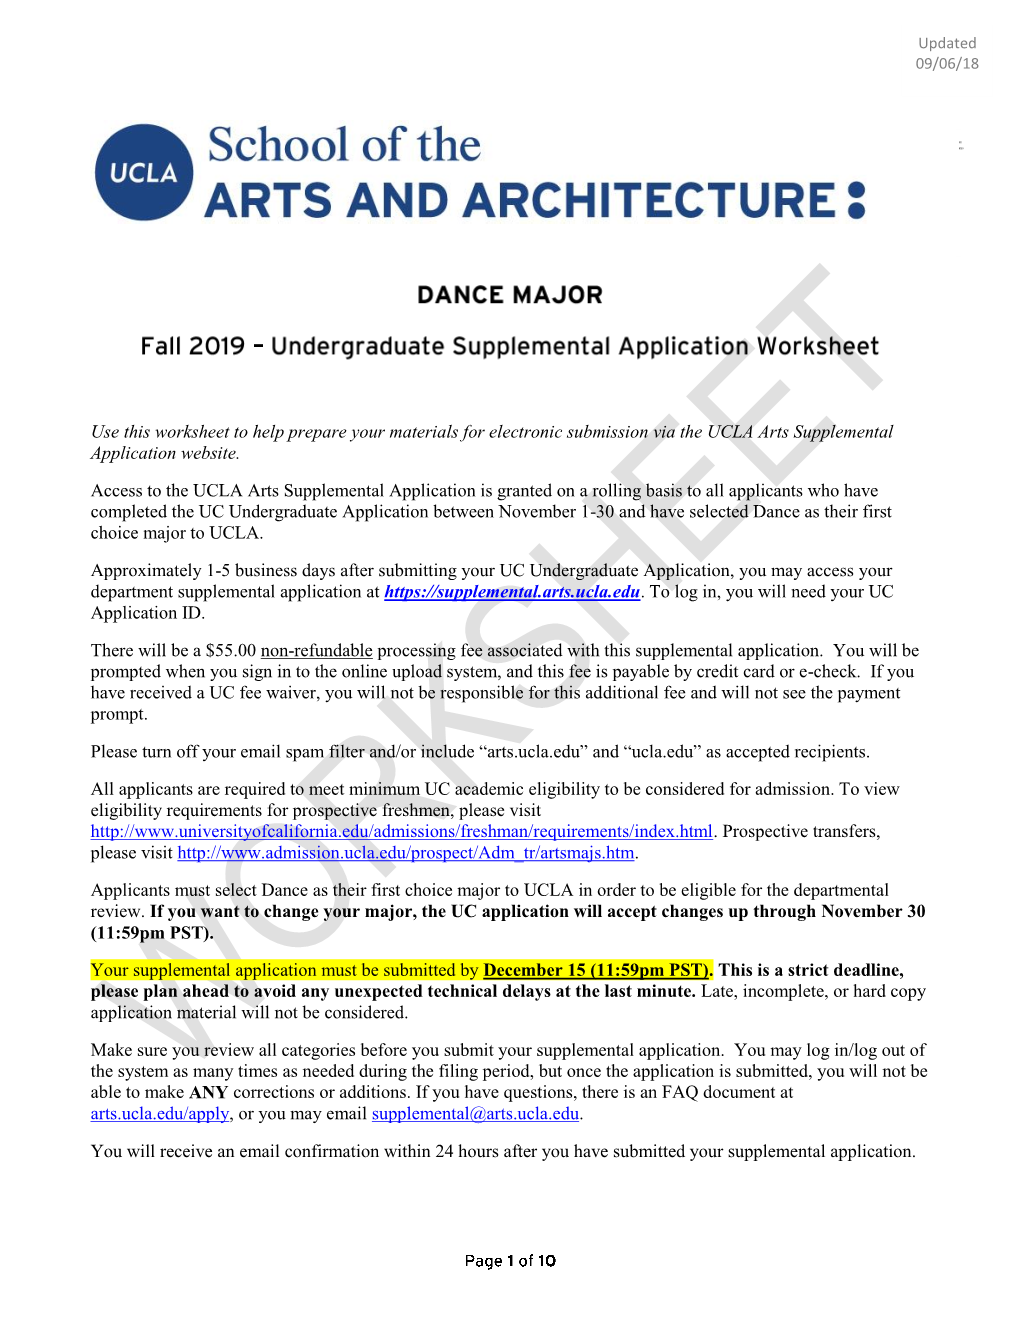 Use This Worksheet to Help Prepare Your Materials for Electronic Submission Via the UCLA Arts Supplemental Application Website